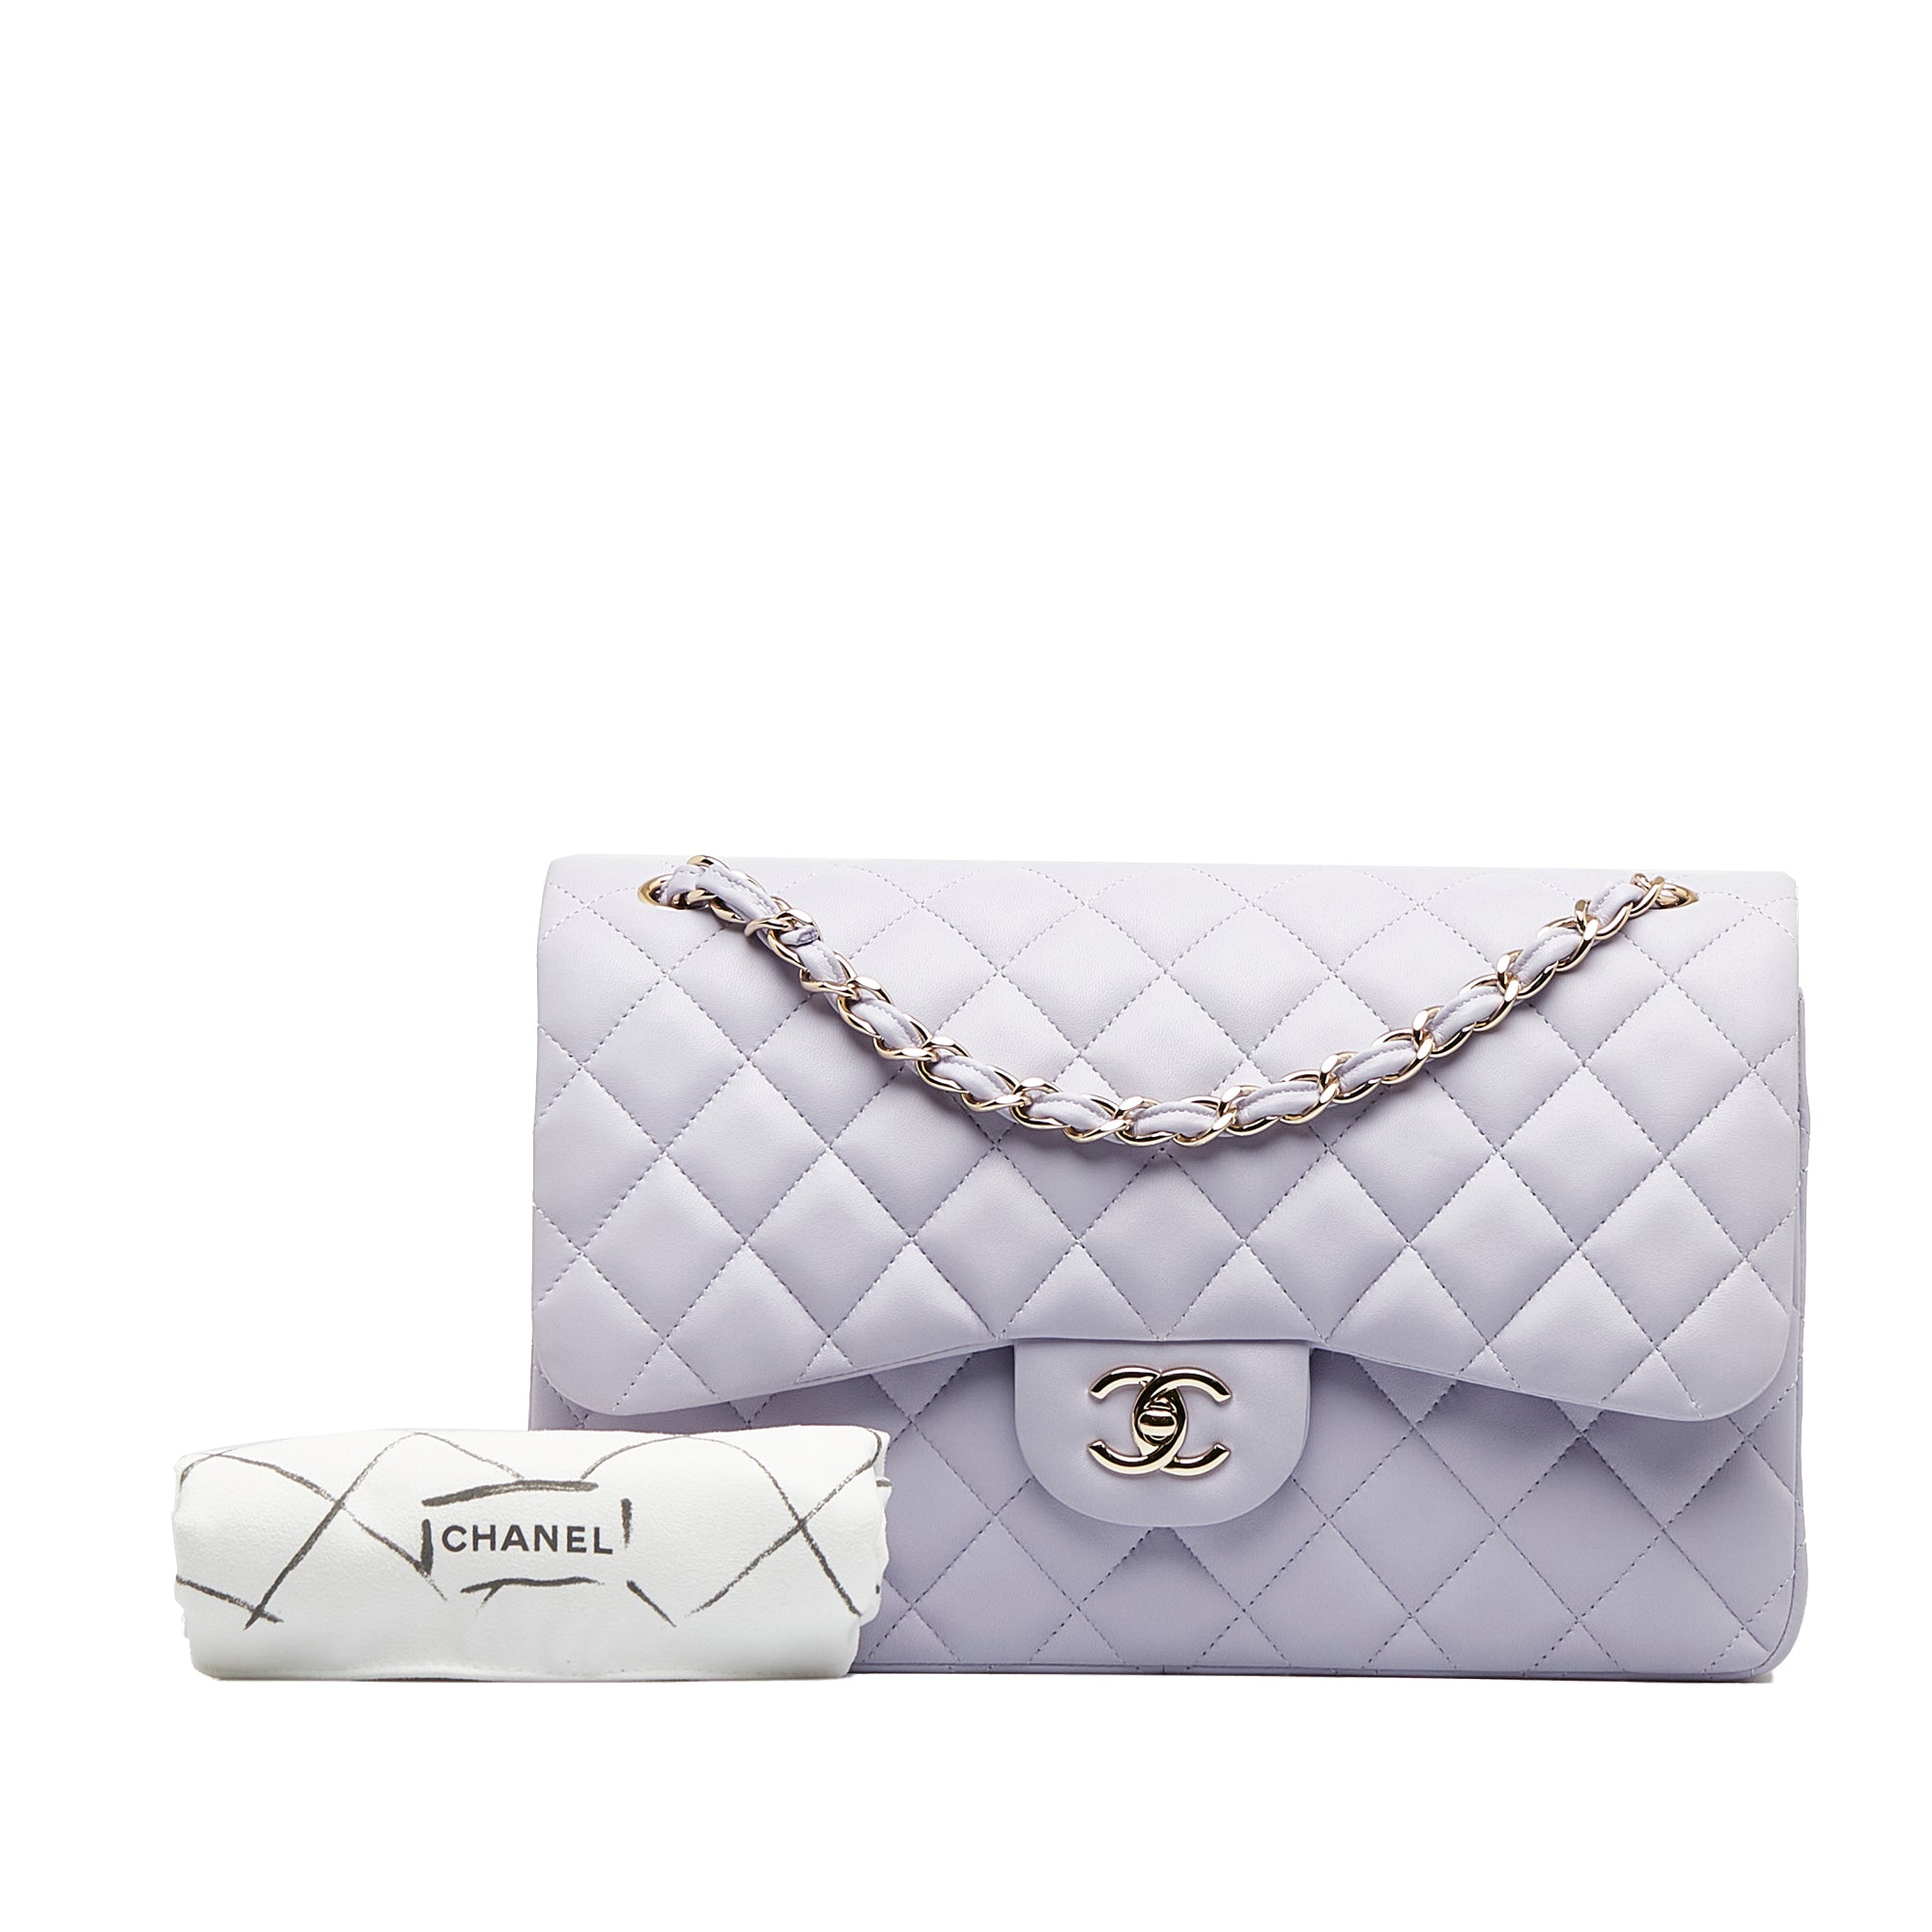 All About the Chanel Classic Flap Bag - The Vault